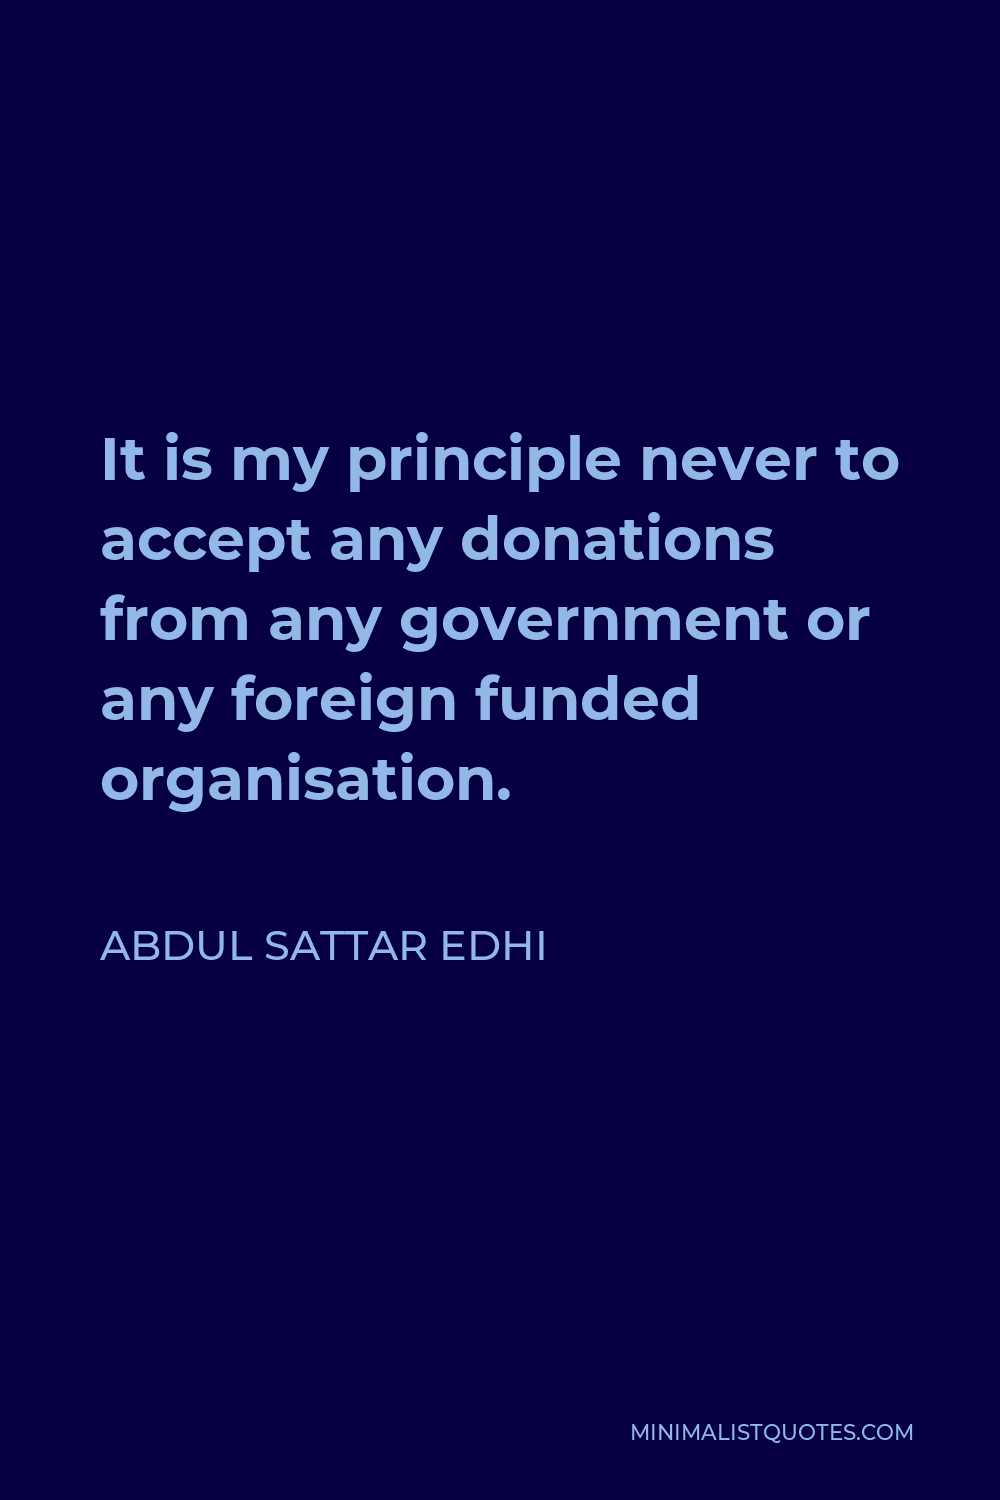 Abdul Sattar Edhi Quote - It is my principle never to accept any donations from any government or any foreign funded organisation.